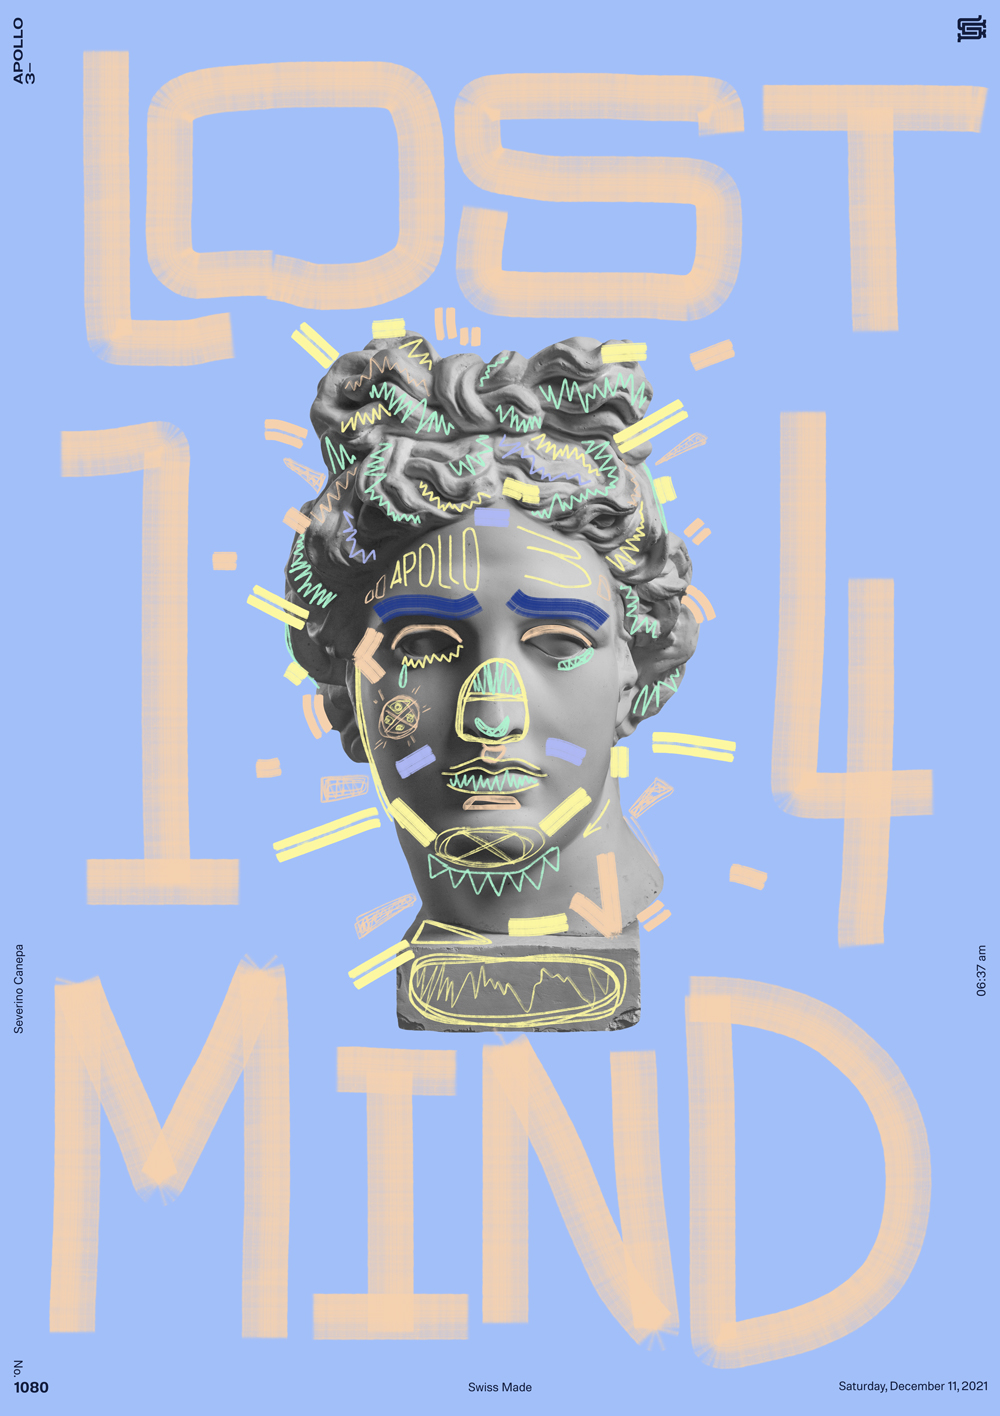 Digital art where I mix the photograph of Apollo and Photoshop brushes